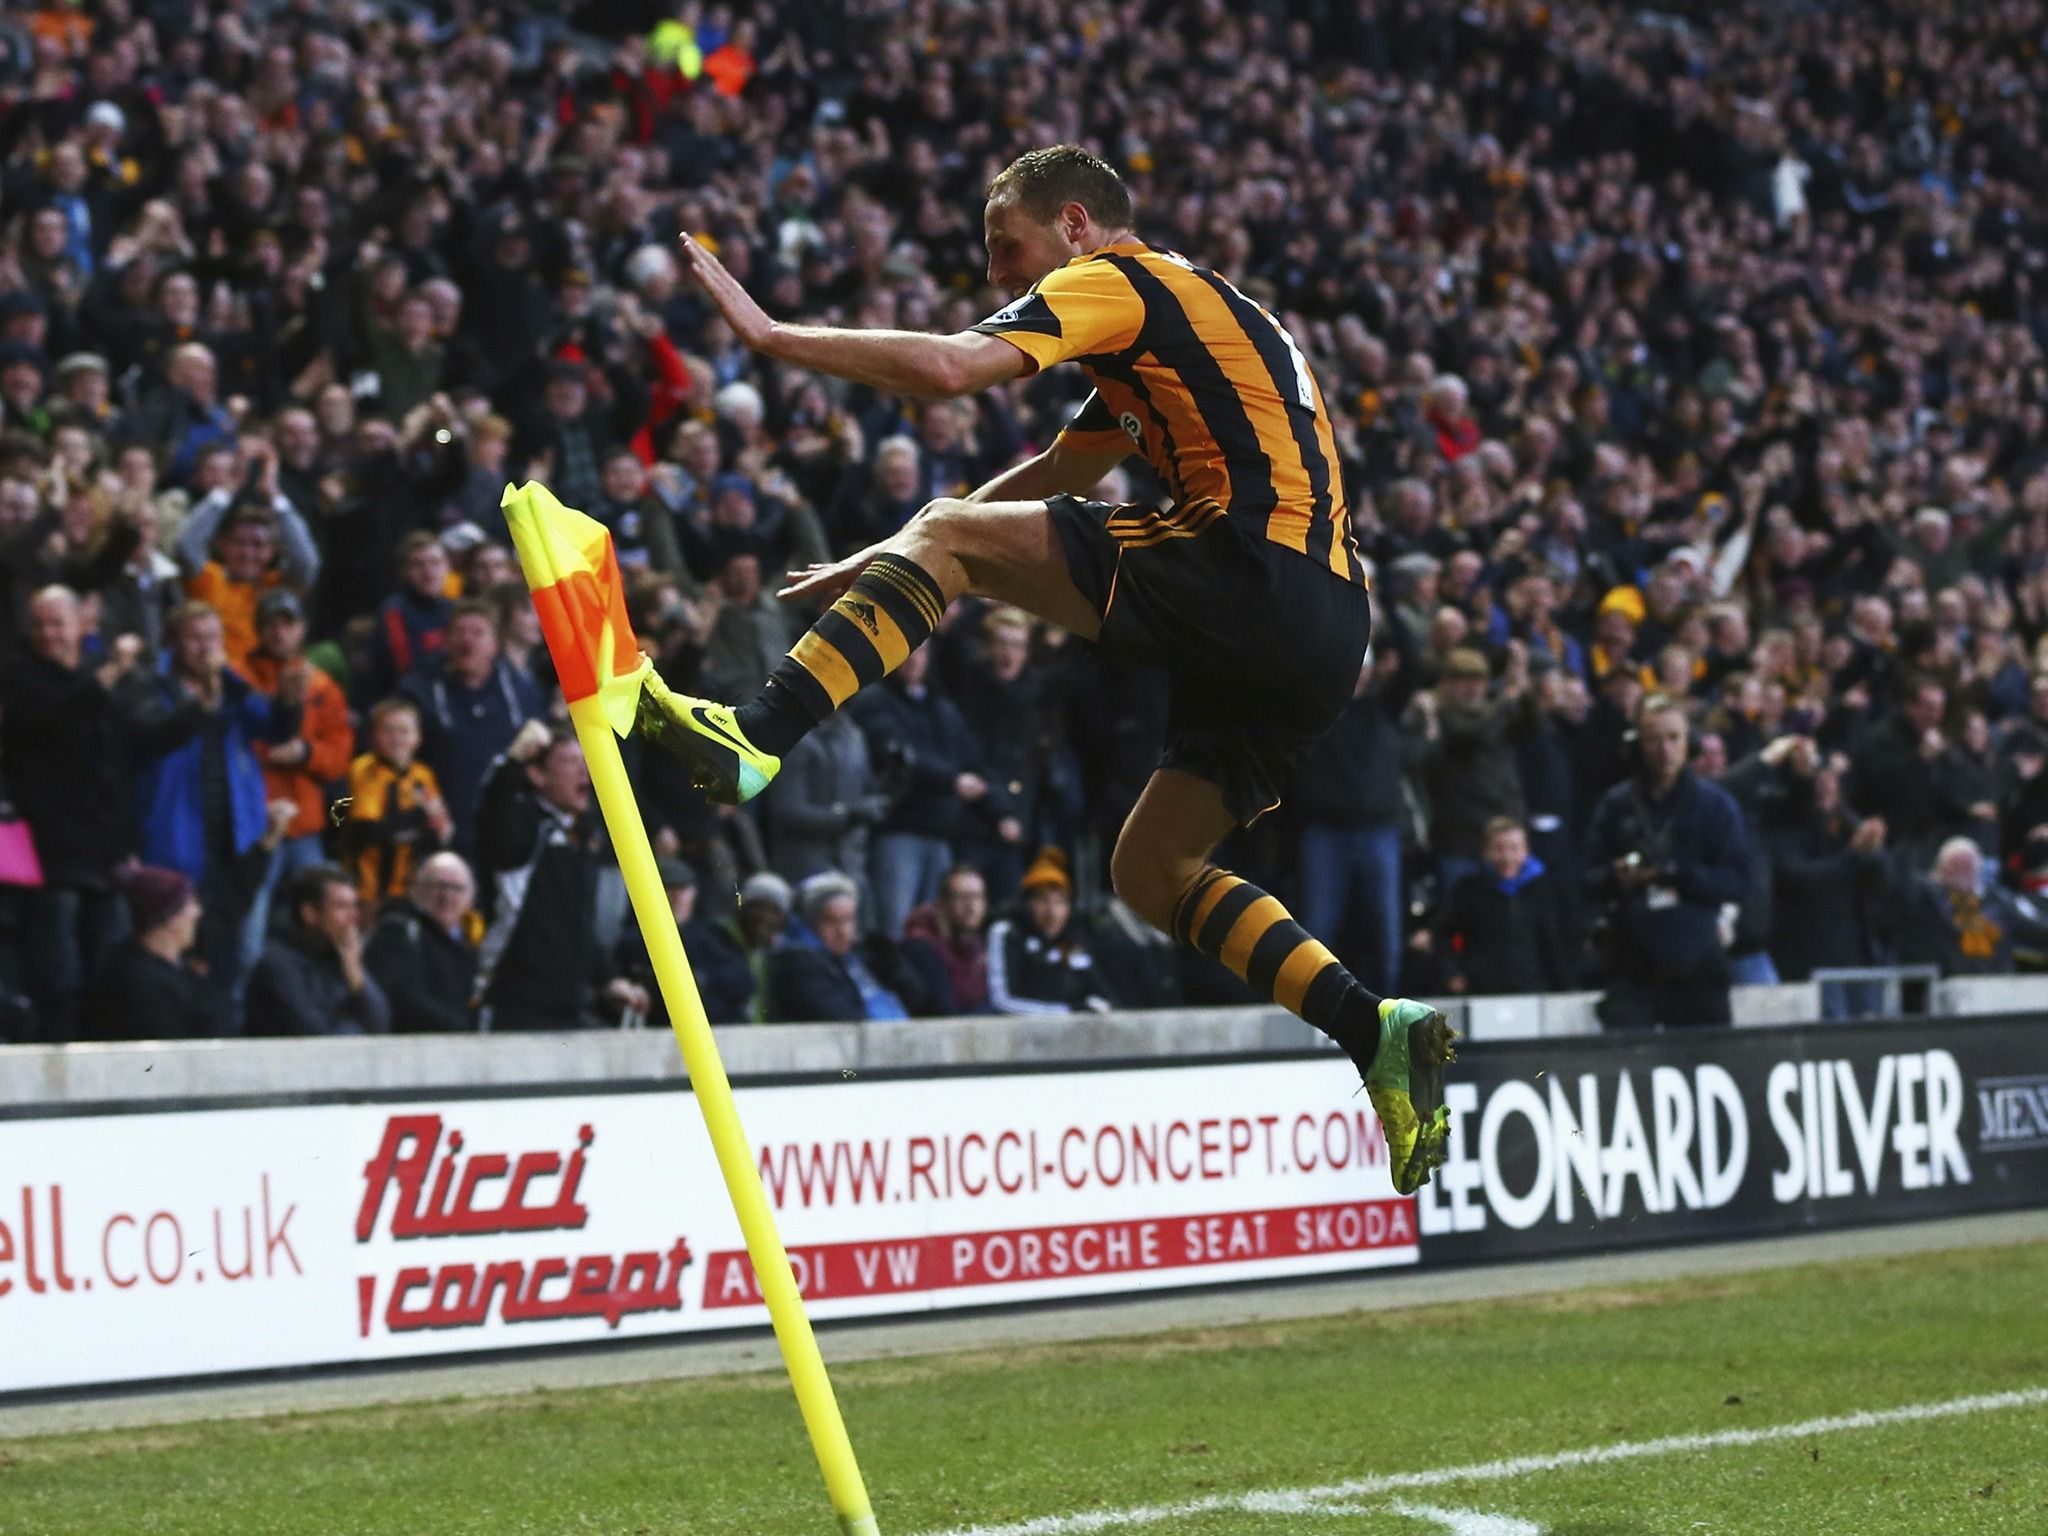 Best Fc Hull City wallpaper and image, picture, photo